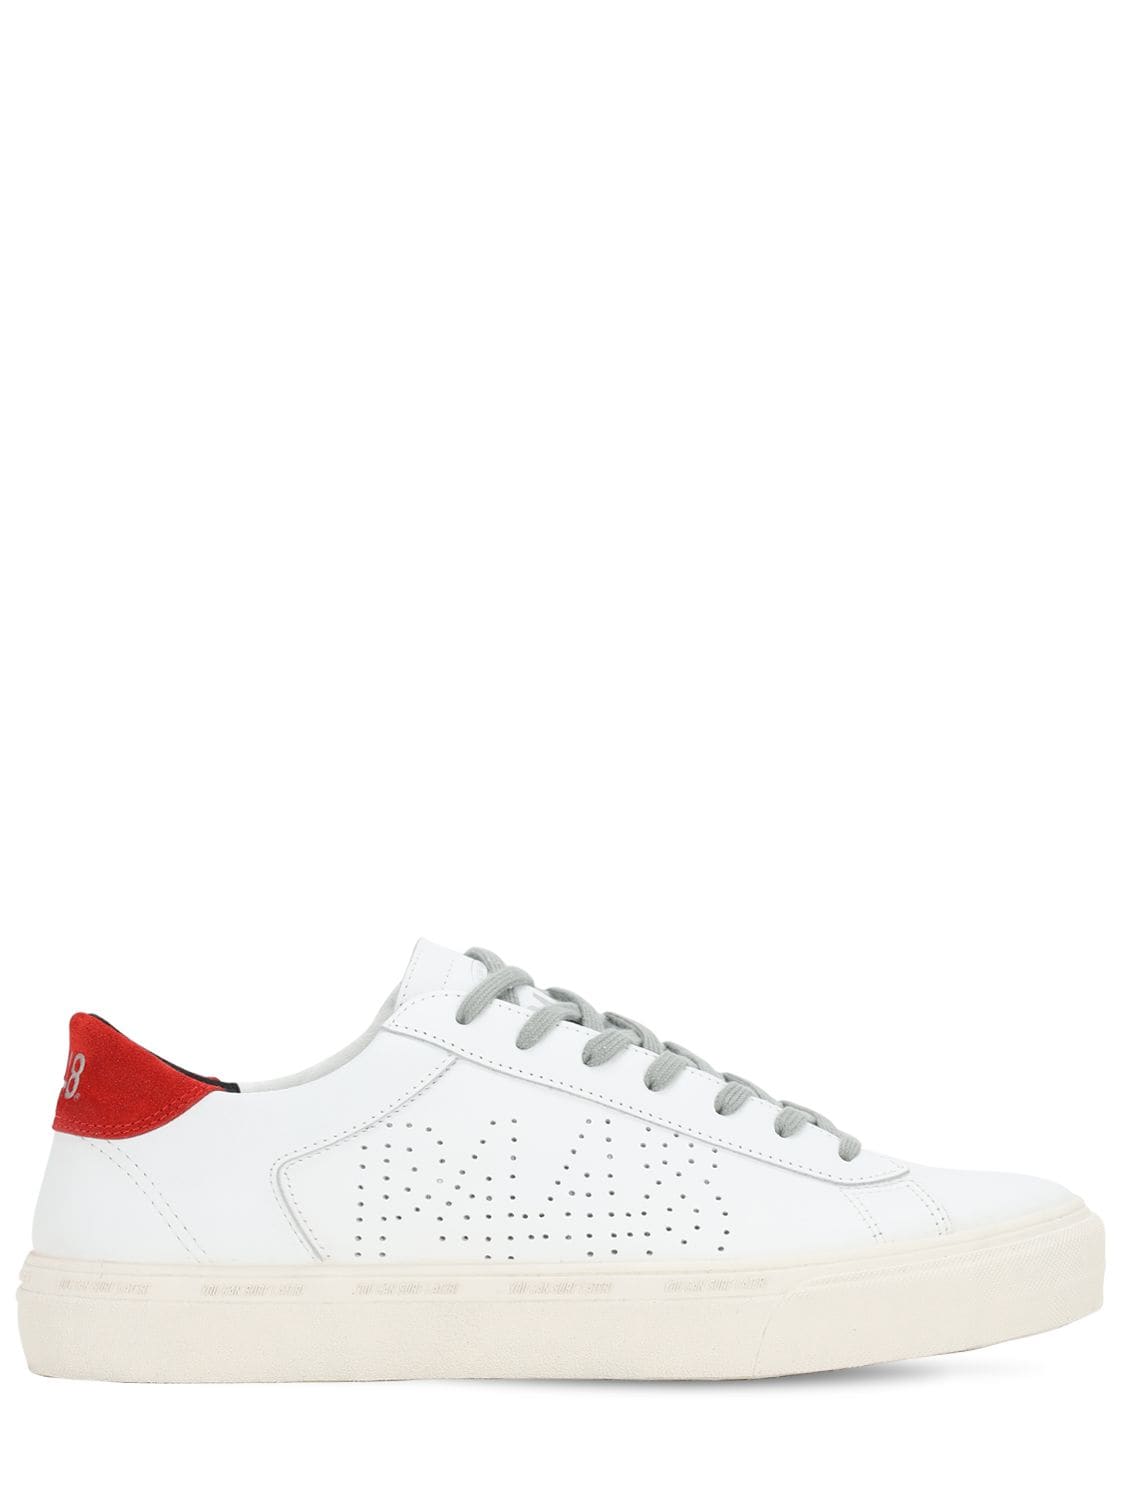 P448 Y.C.S.L. LEATHER LOW TOP SNEAKERS,72IHLL012-V0HJL1JFRA2